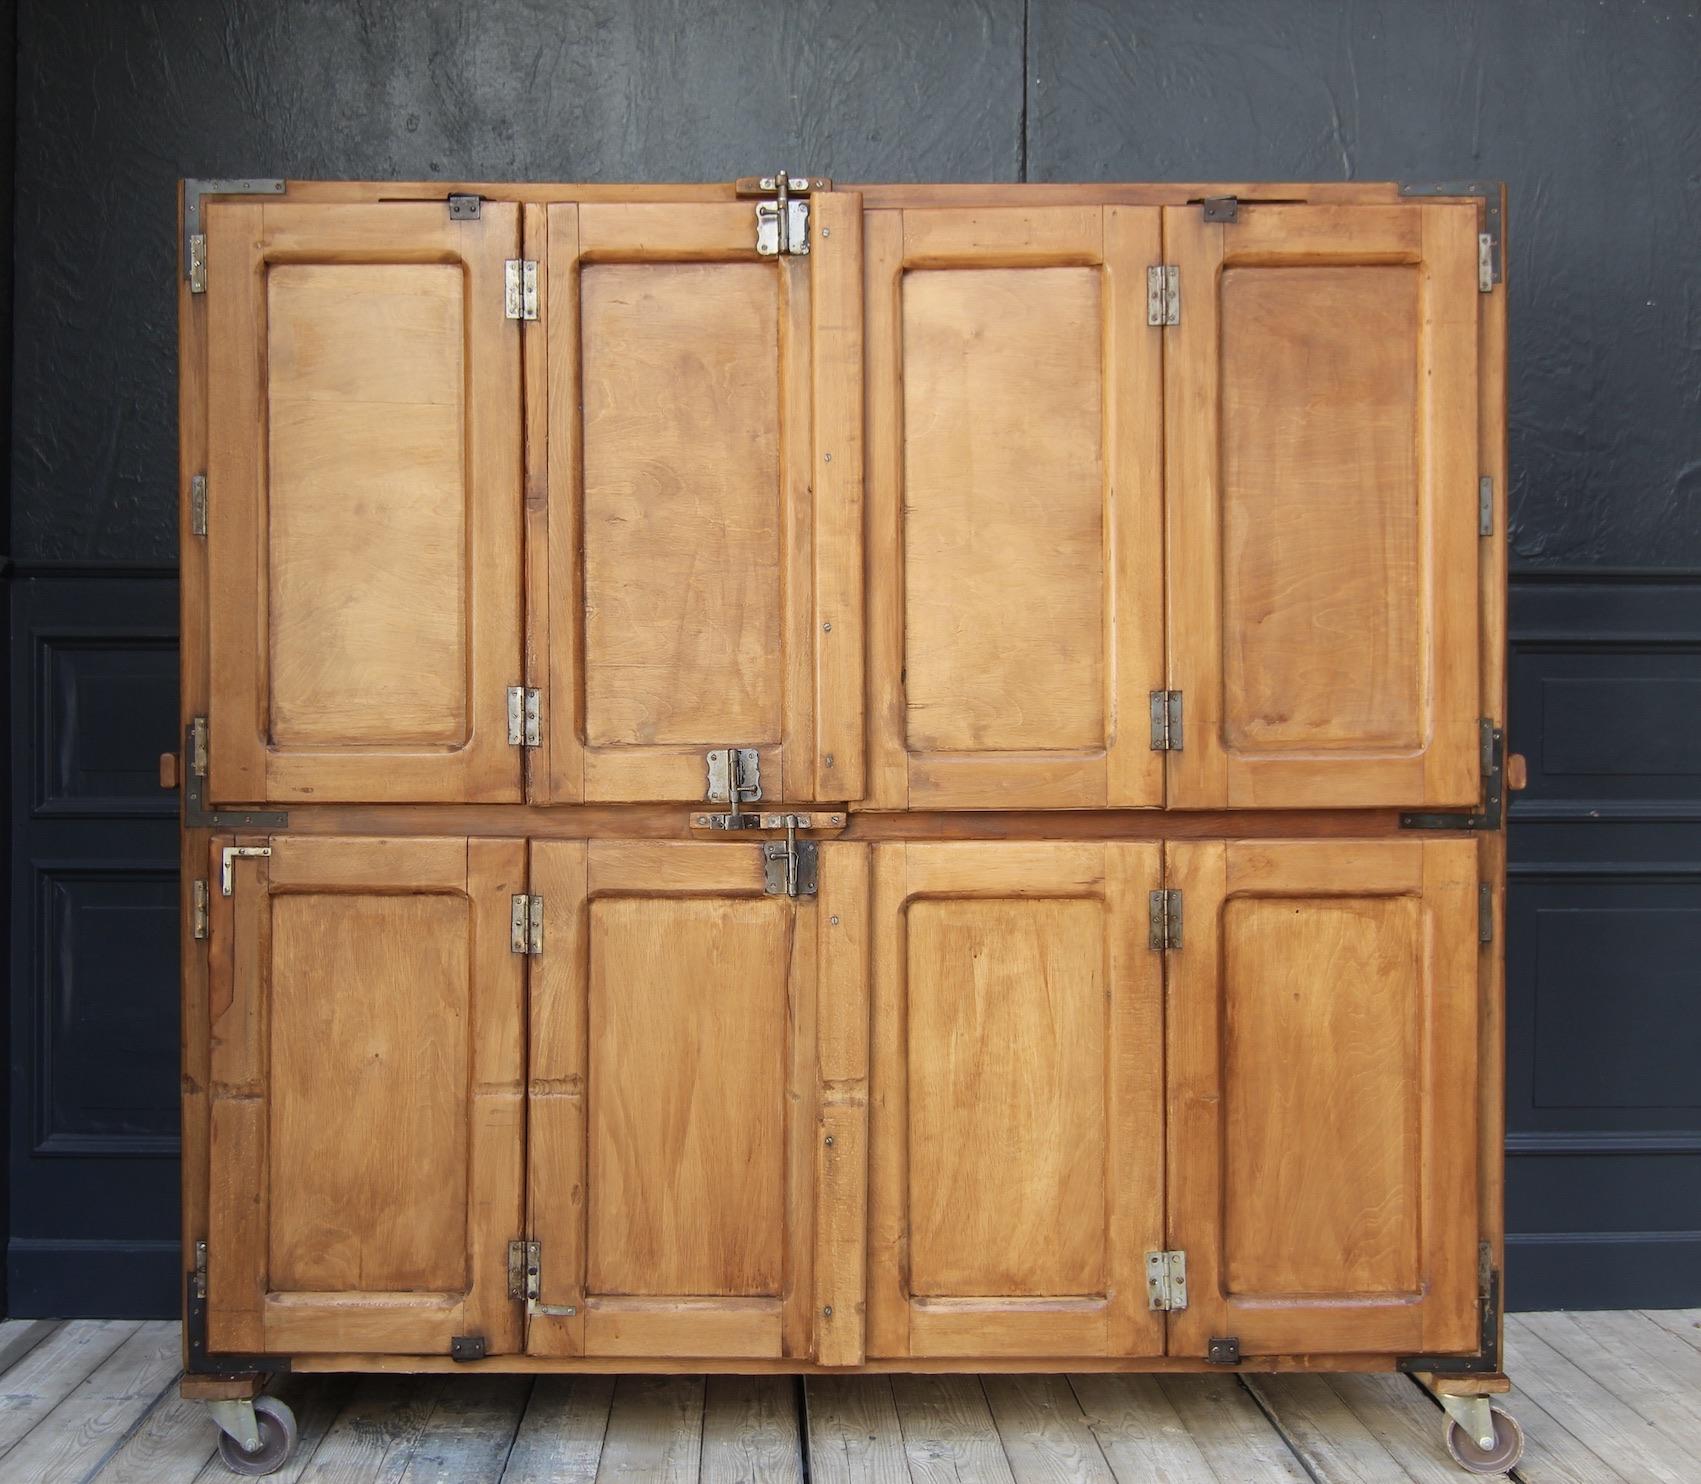 French bakery cabinet from the 1st half of the 20th century.

Beech wood corpus on castors with 4 folding doors, behind which there are 9 removable shelves.

Dimensions:
175 cm high / 68.9 inch High,
184 cm wide / 72.4 inch Wide,
60 cm deep /